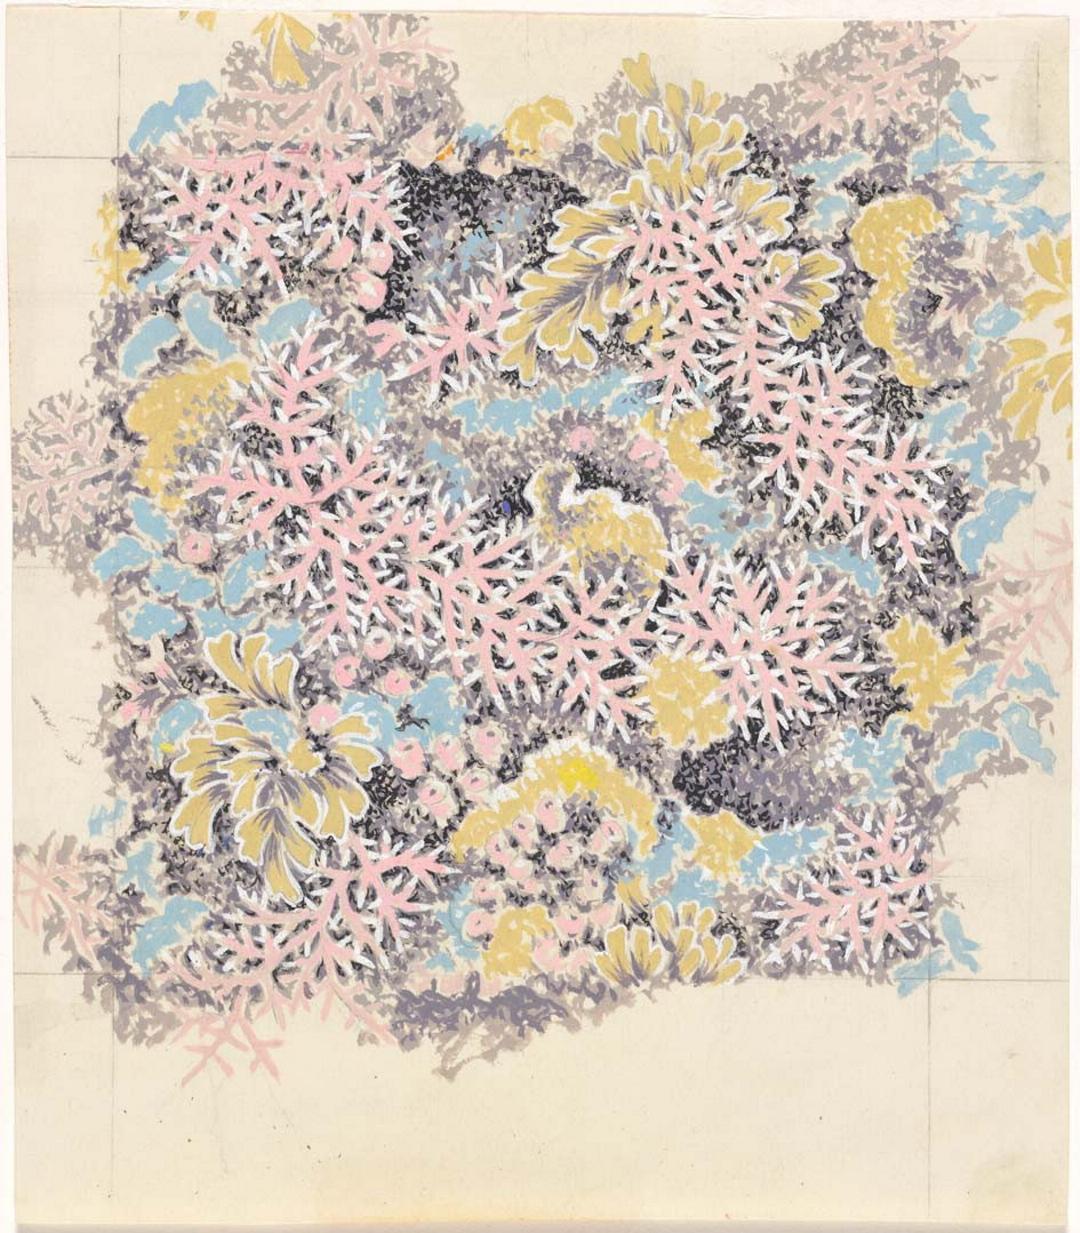 A coral reef textile design by Olive Ashworth (only one part).